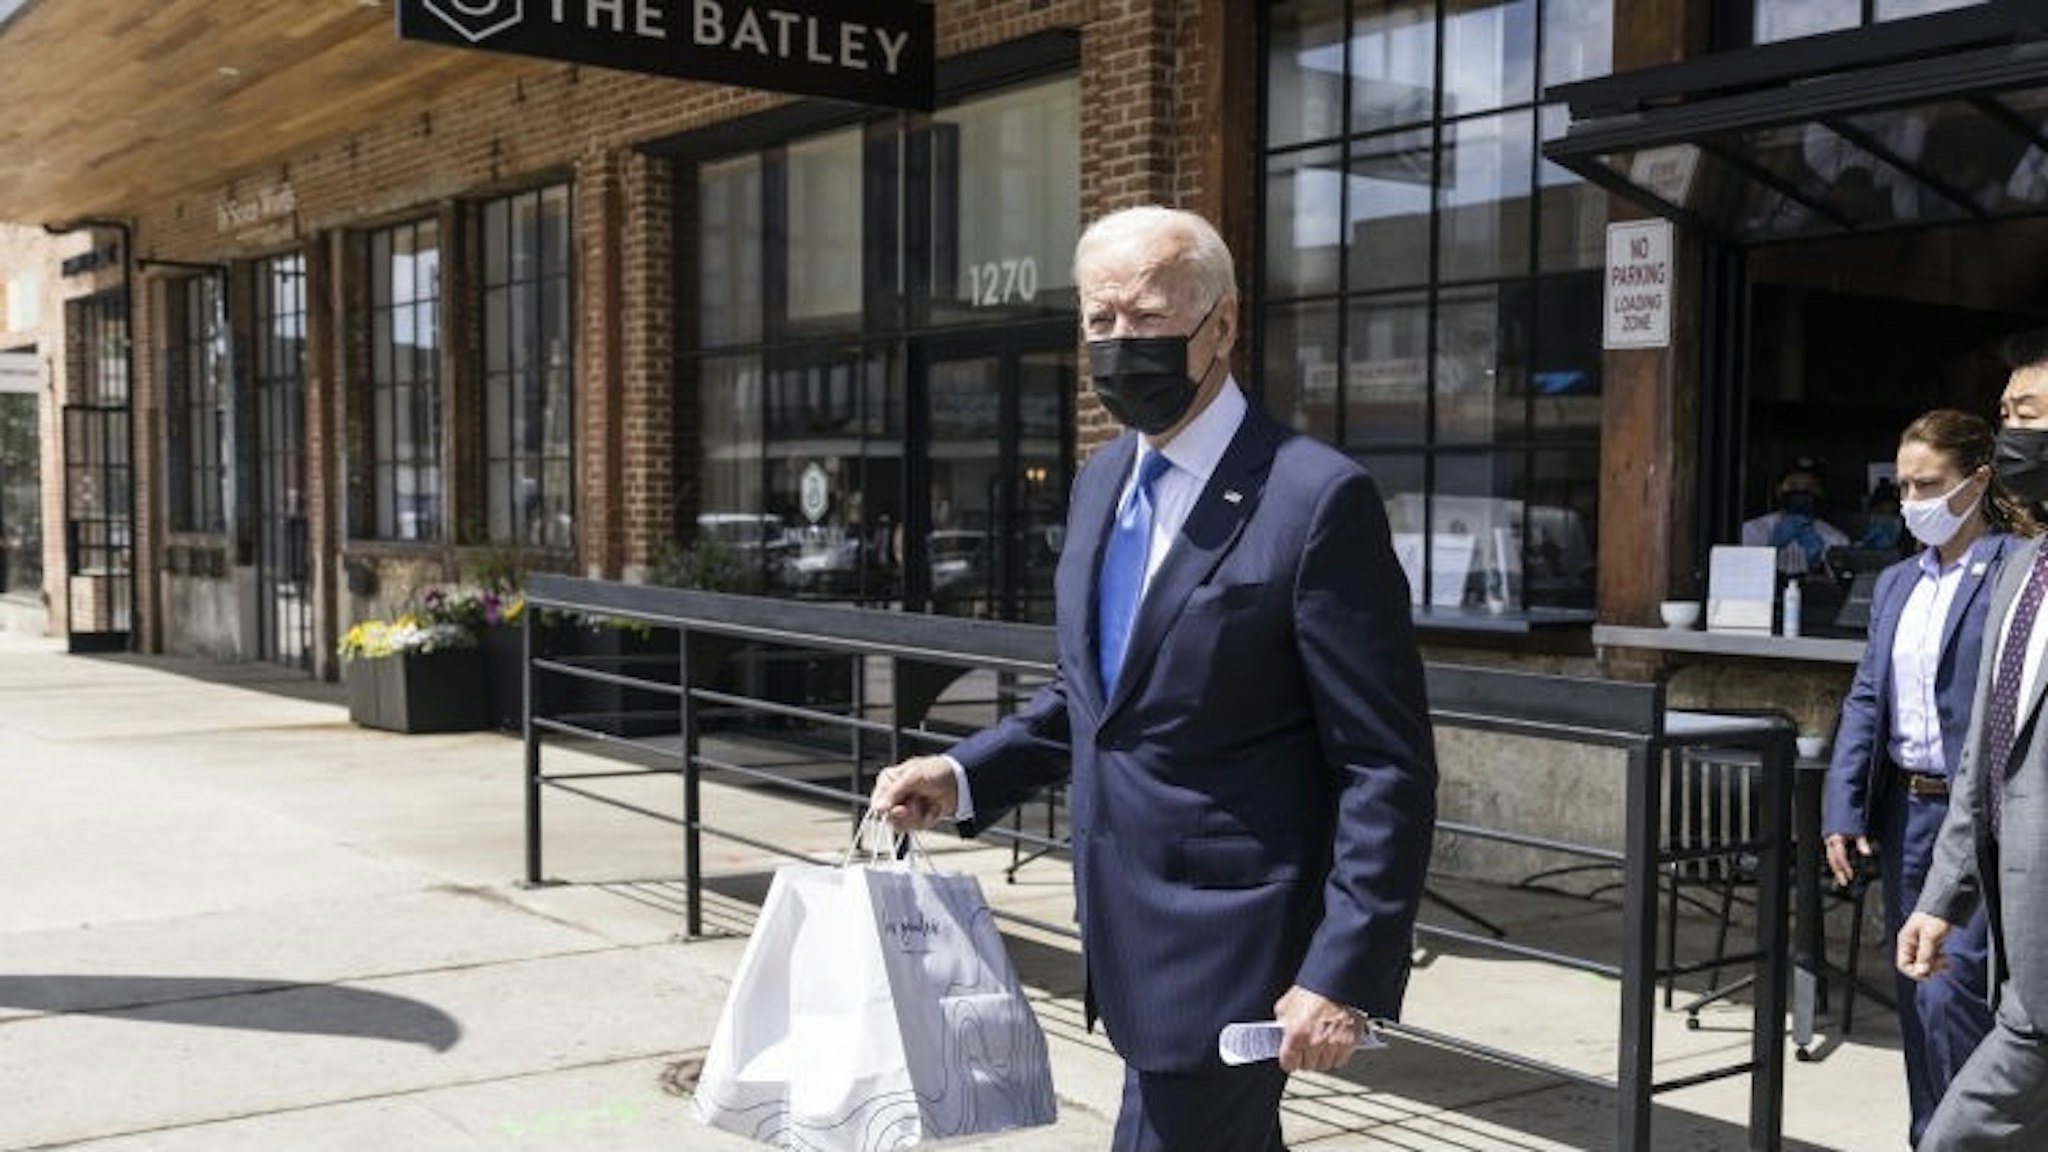 U.S. President Joe Biden wears a protective mask while carrying to-go food at Las Gemelas restaurant in Washington, D.C., U.S., on Wednesday, May 5, 2021. The Biden administration canceled a signature Trump-era rule that would've eased businesses ability to legally consider workers as independent contractors, a rollback the U.S. Labor Department said was necessary to broadly extend wage protections while cracking down on employer abuses. Photographer: Jim Lo Scalzo/EPA/Bloomberg